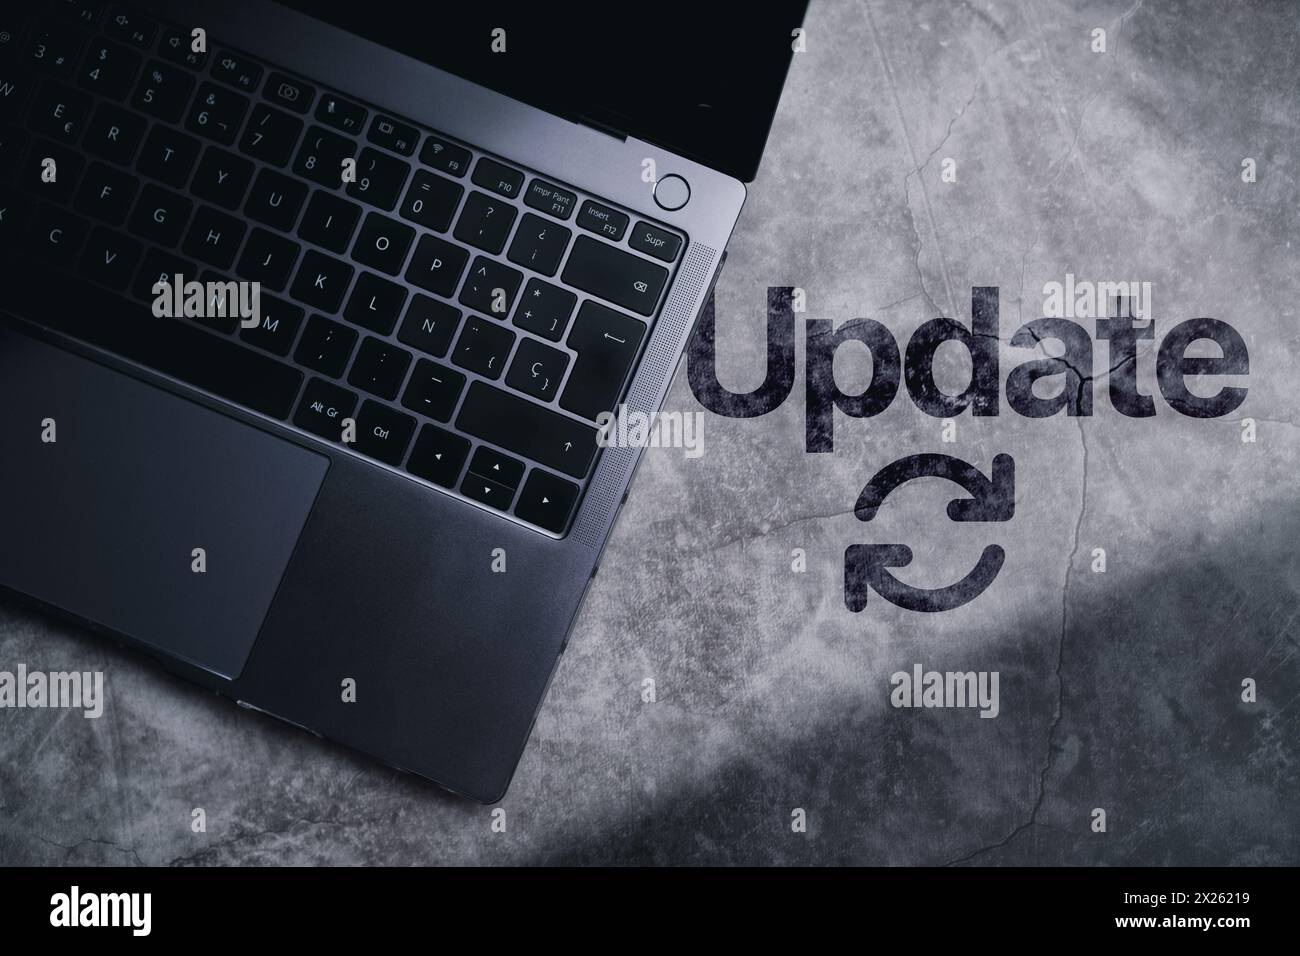 Desktop top view with laptop and the word update written on surface. Software upgrade concept with empty space for use. Stock Photo